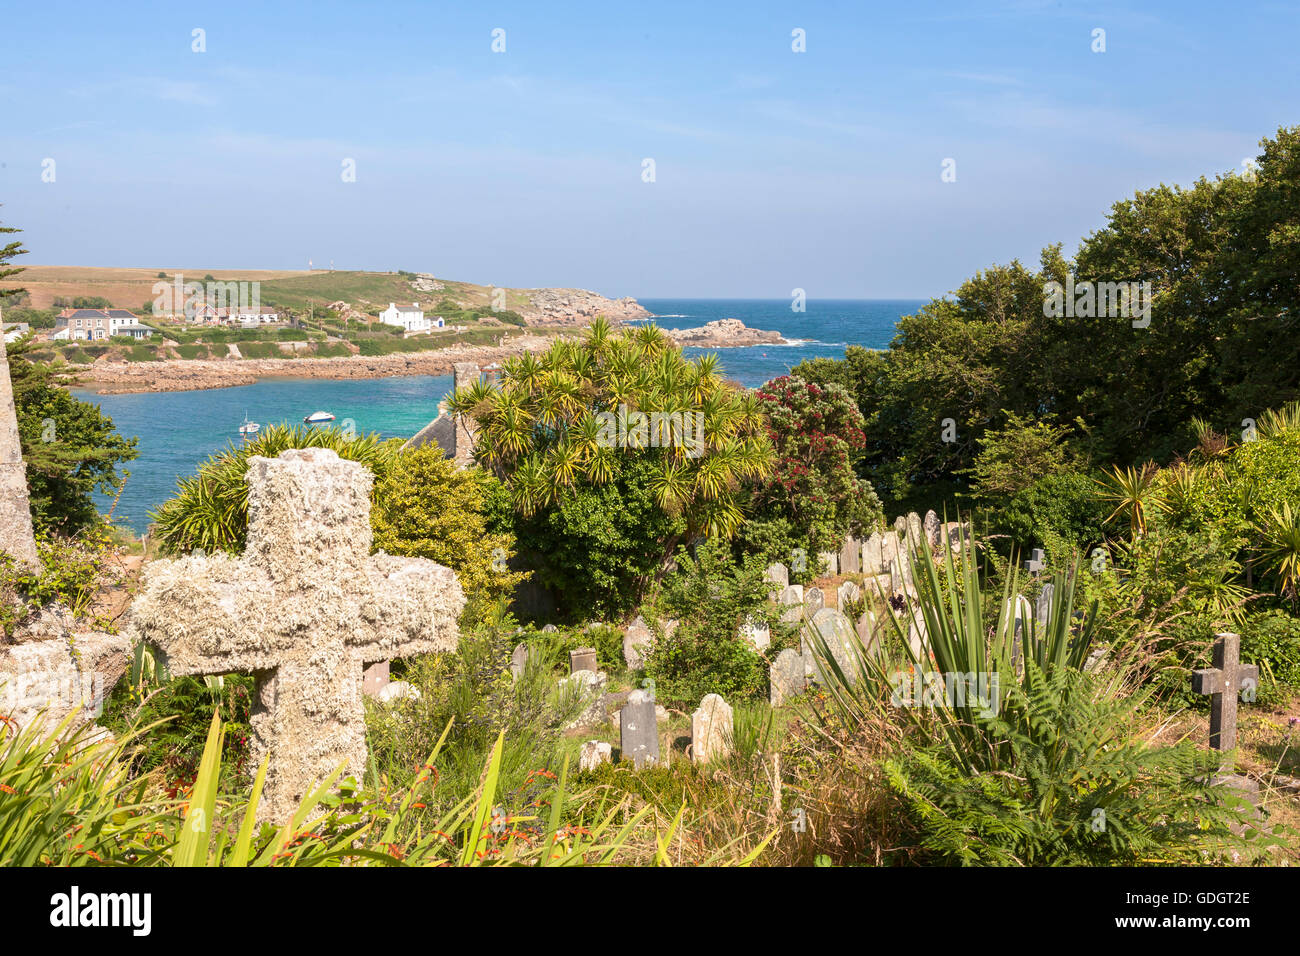 Cemetery of St. Mary's Old Church, St. Mary's, Isles of Scilly, UK Stock Photo